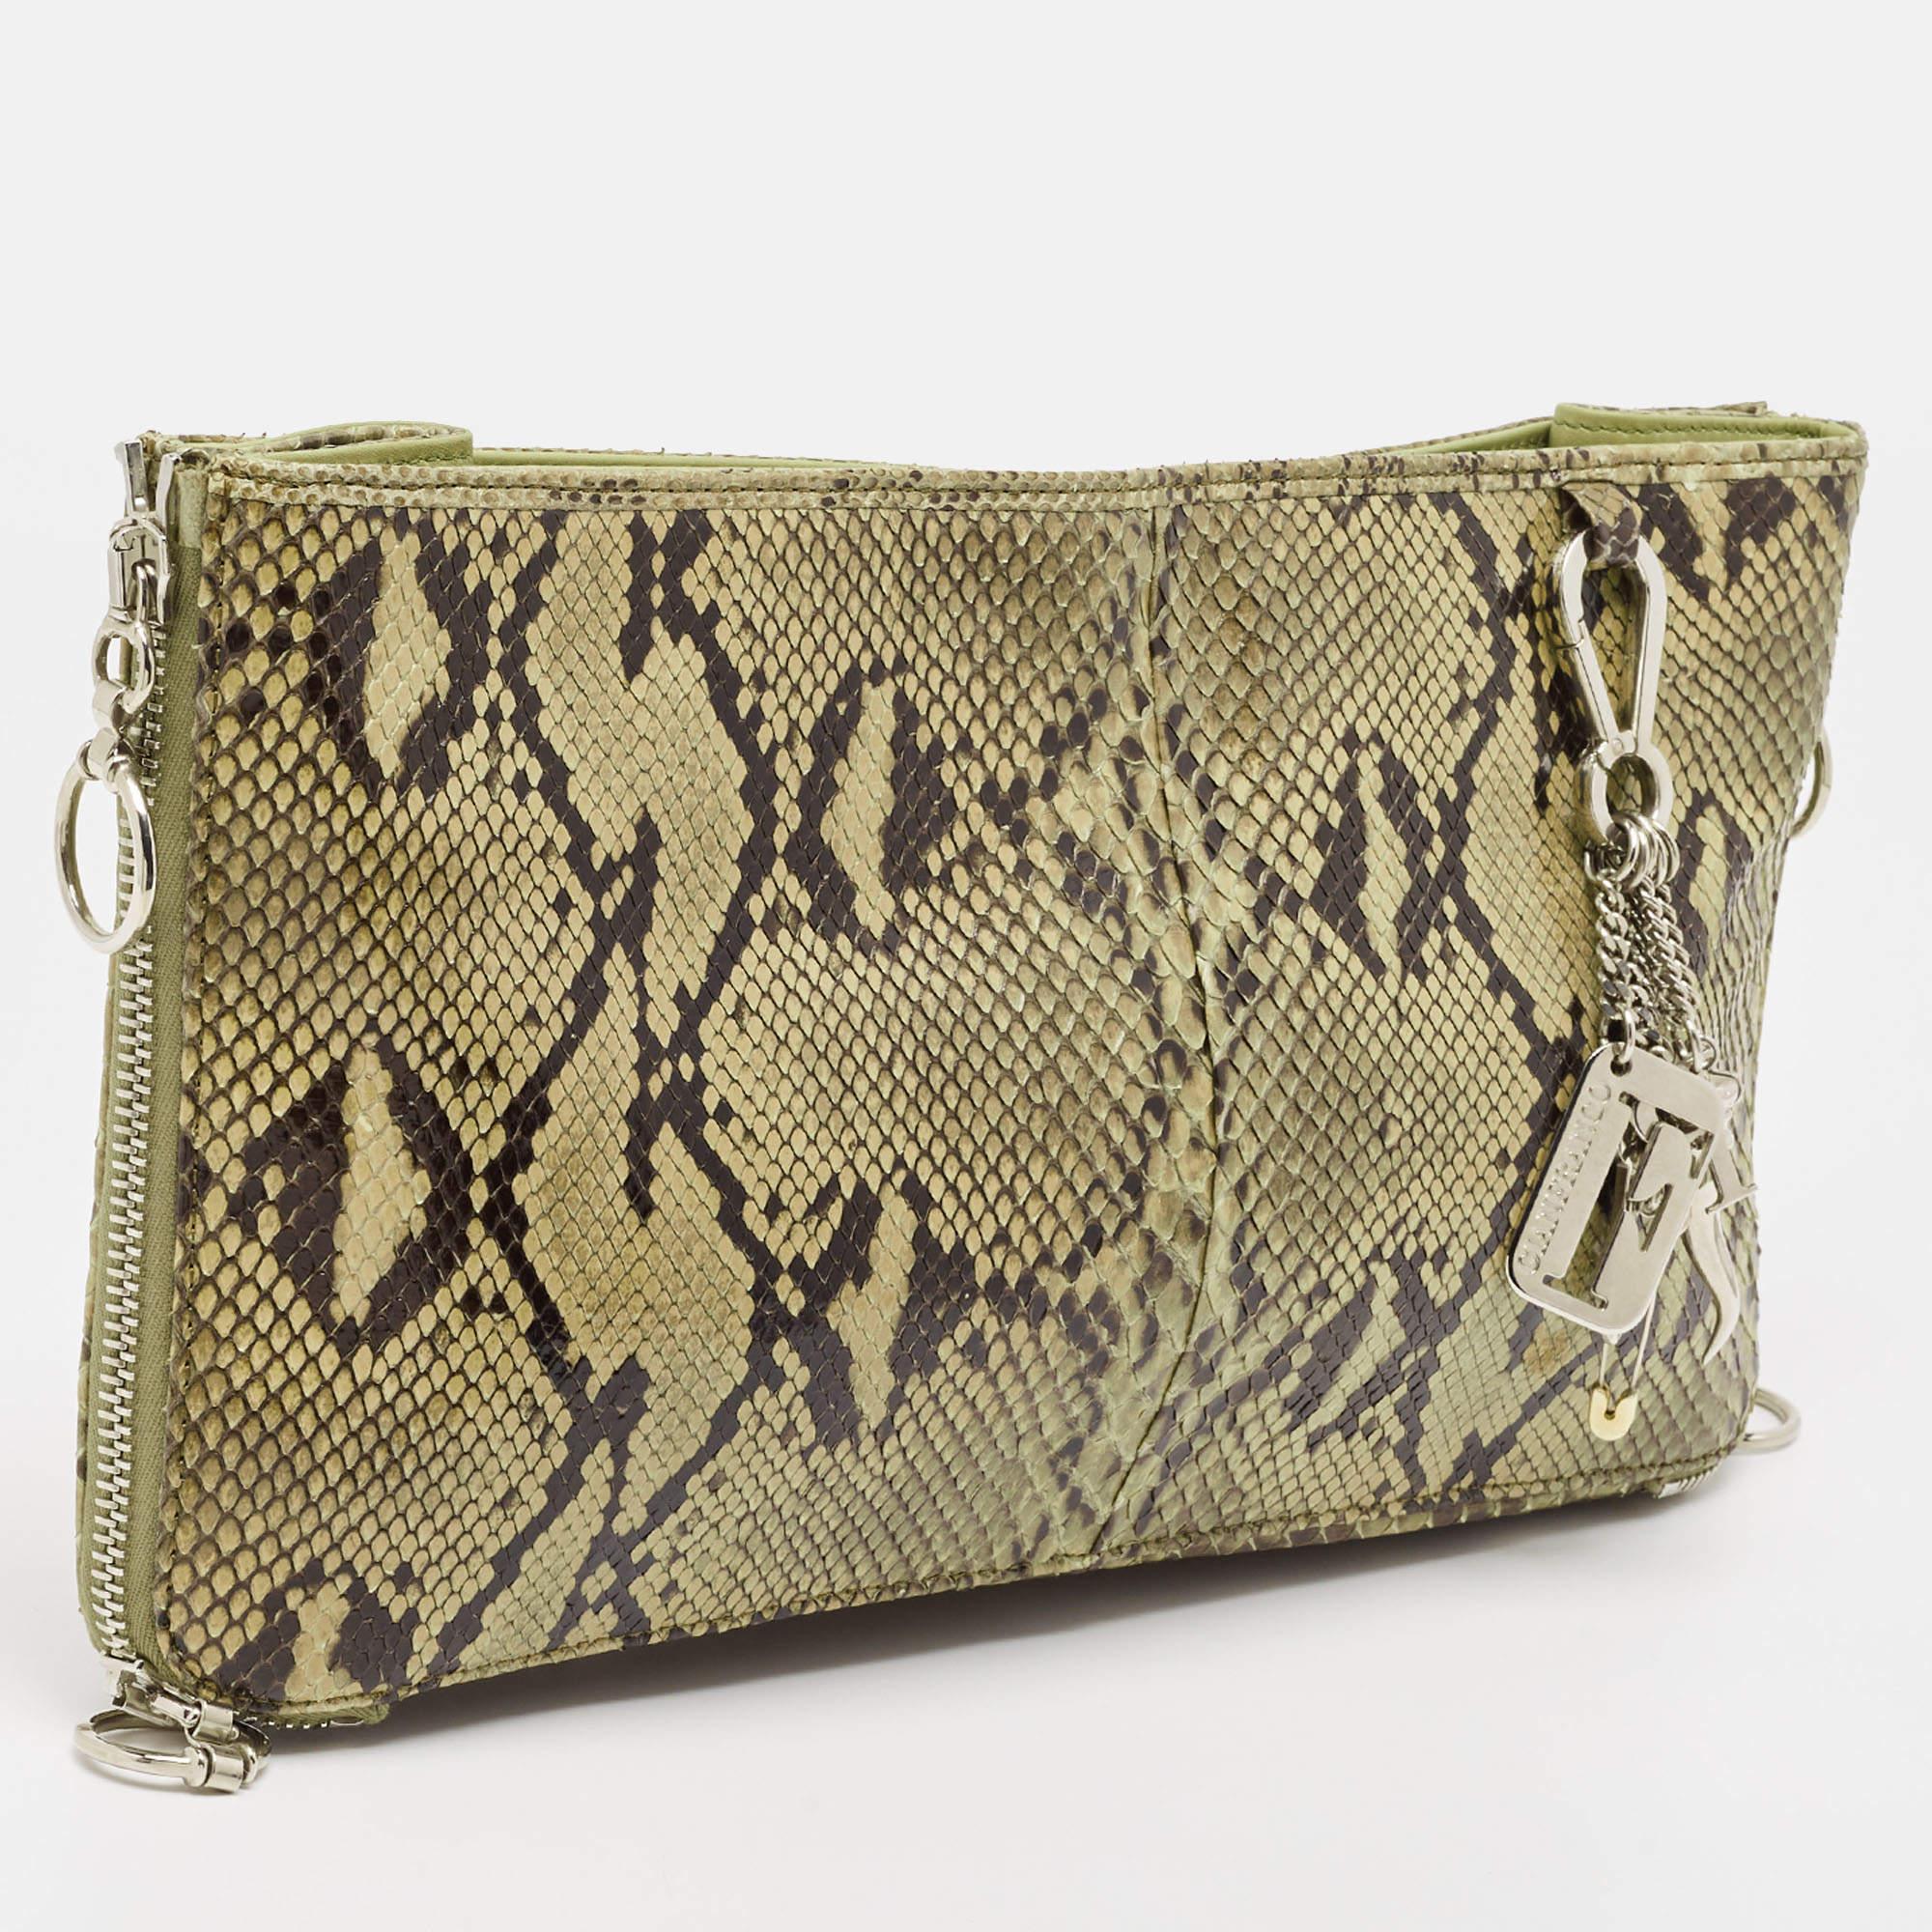 Gianfranco Ferre Olive Green Python Oversized Zip Clutch For Sale 3